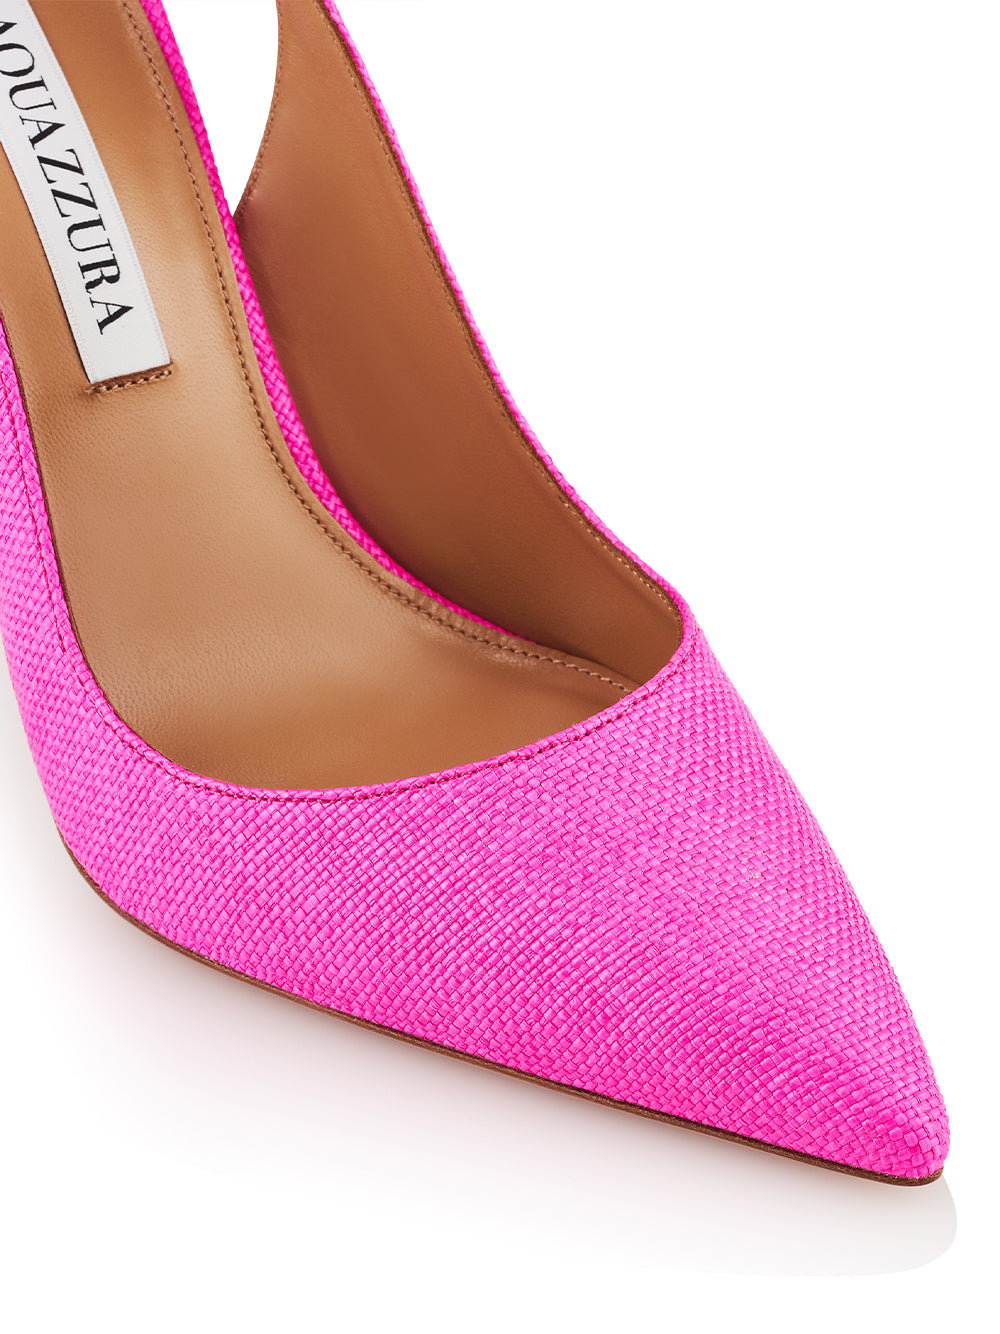 Bow Tie Pumps 105 (Ultra Pink)